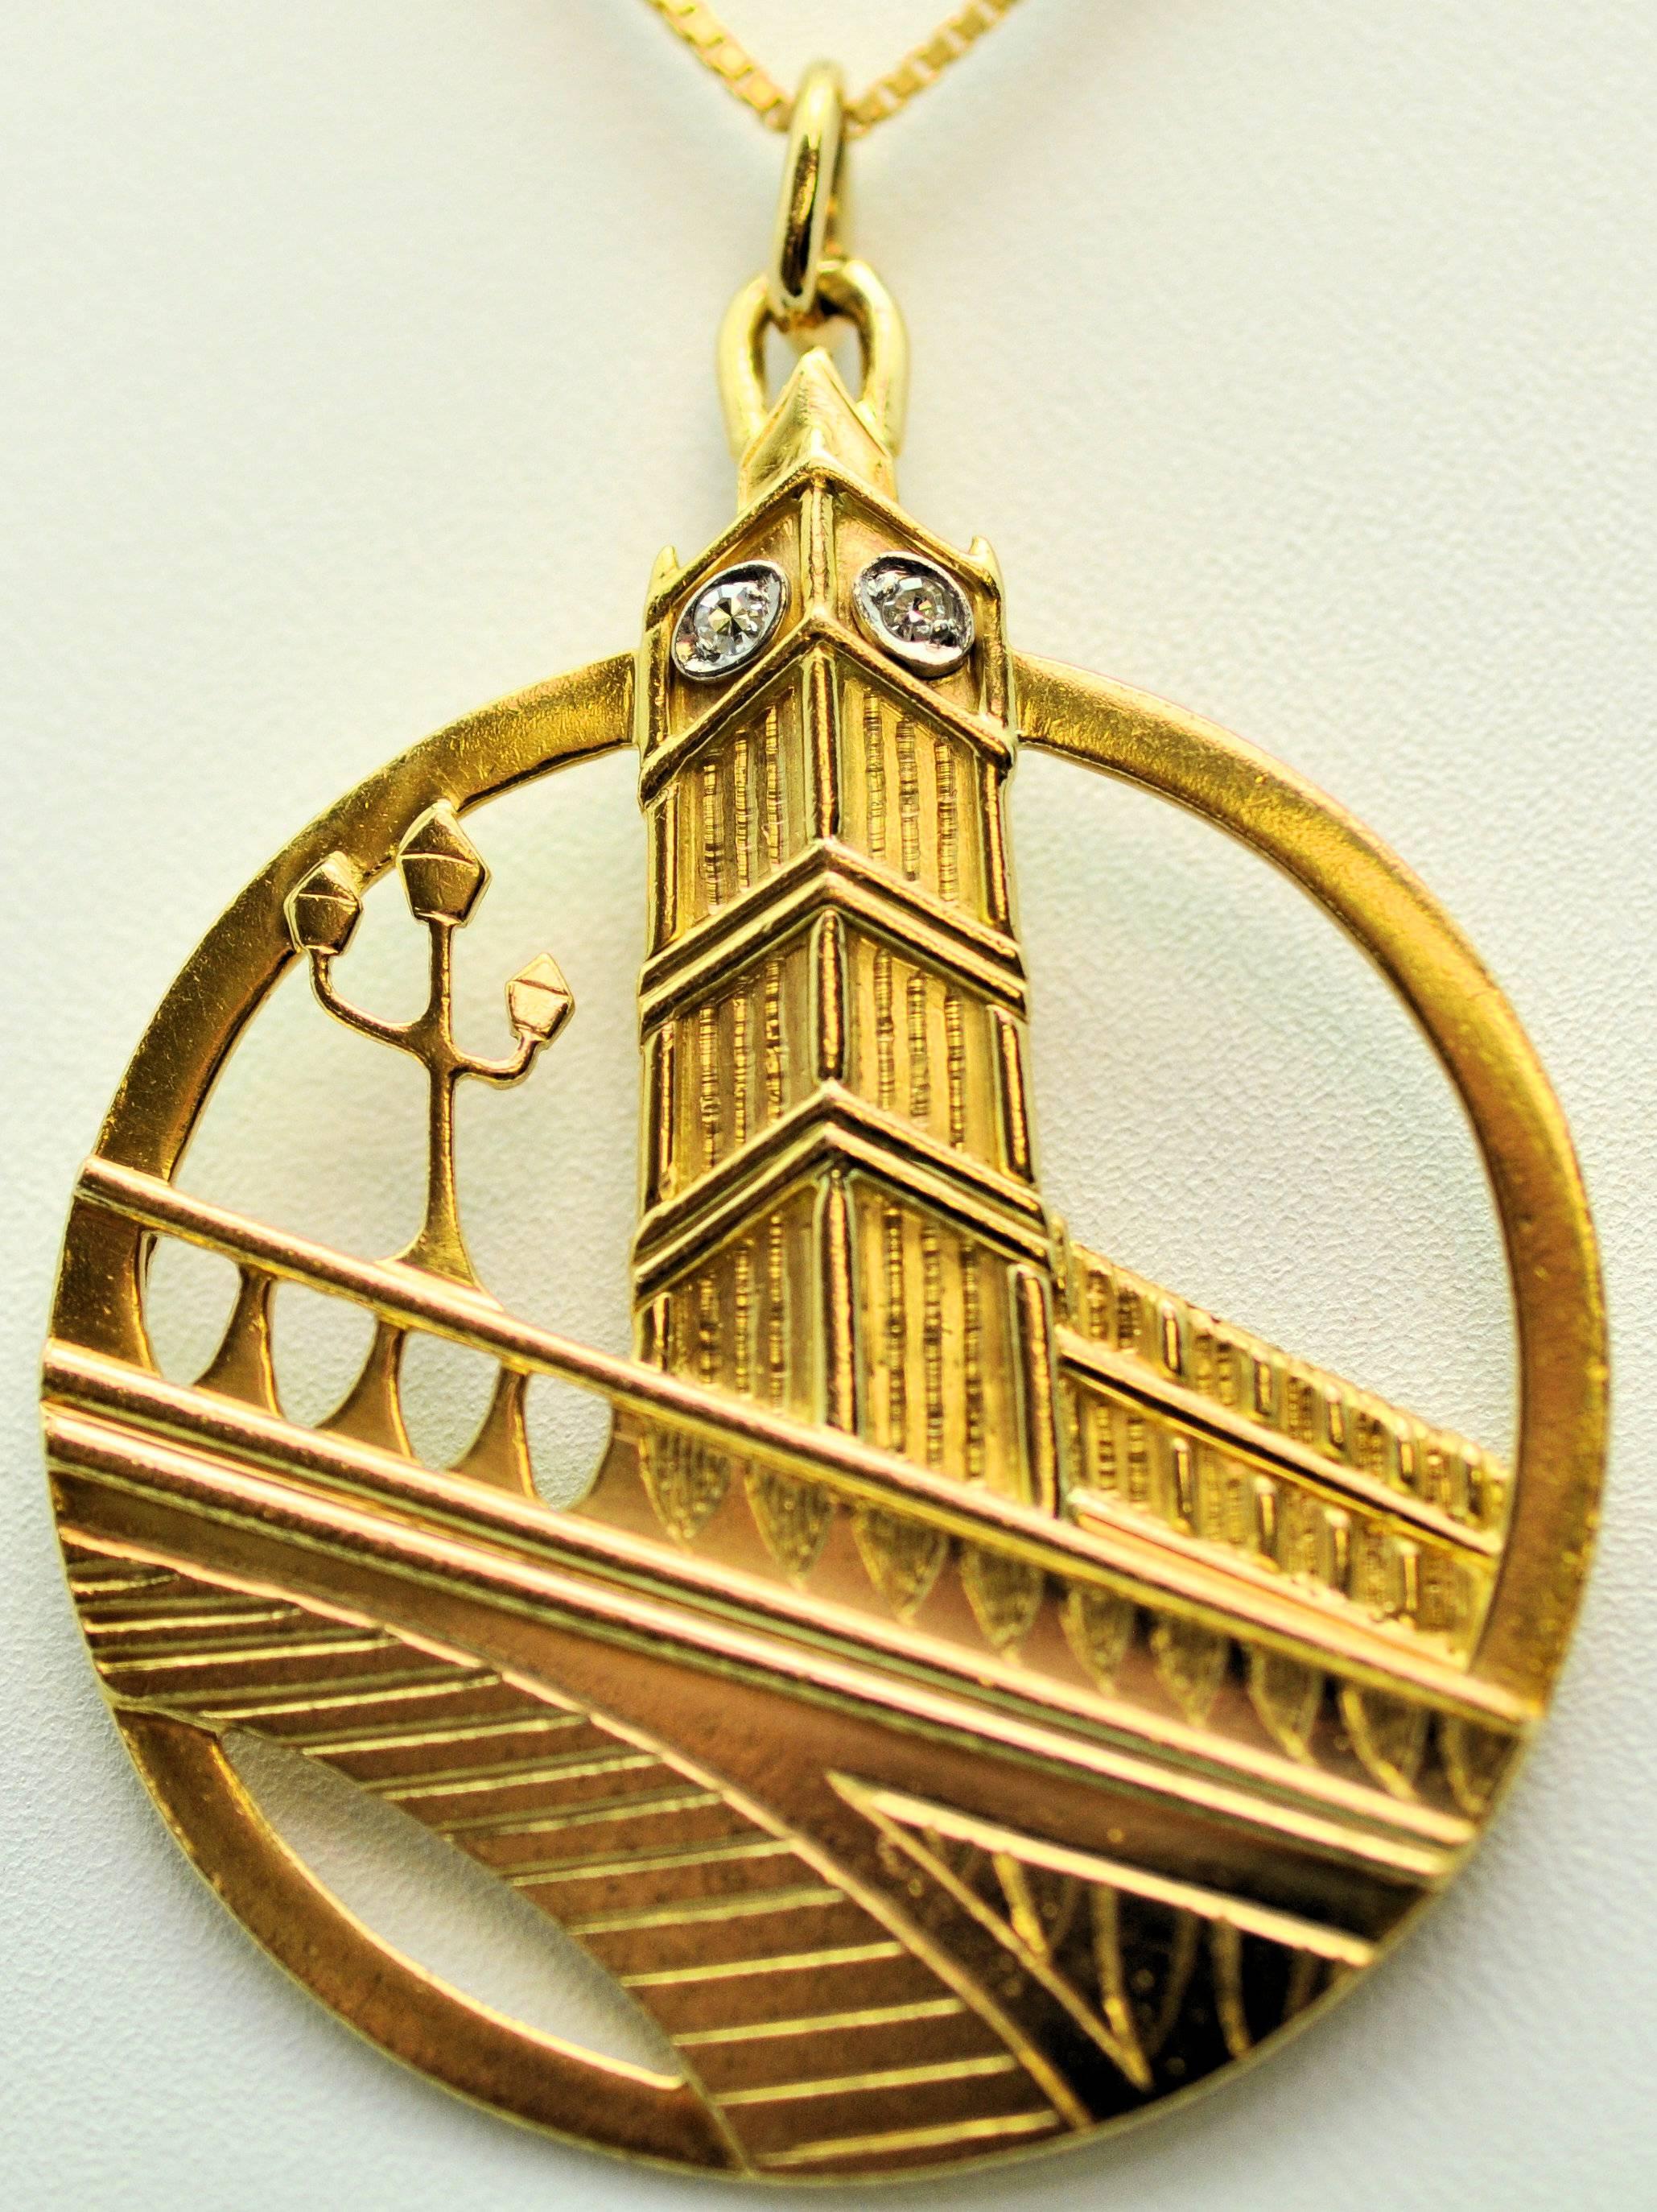 18K yellow gold dramatically styled Big Ben pendant/charm with bridge and light post.  Diamonds set in clock face. Signed Cartier, with full British hallmarks for 18K, London, 1977, maker JG.  Two diamonds total 0.04 ct, total weight. VS-1, G. Chain